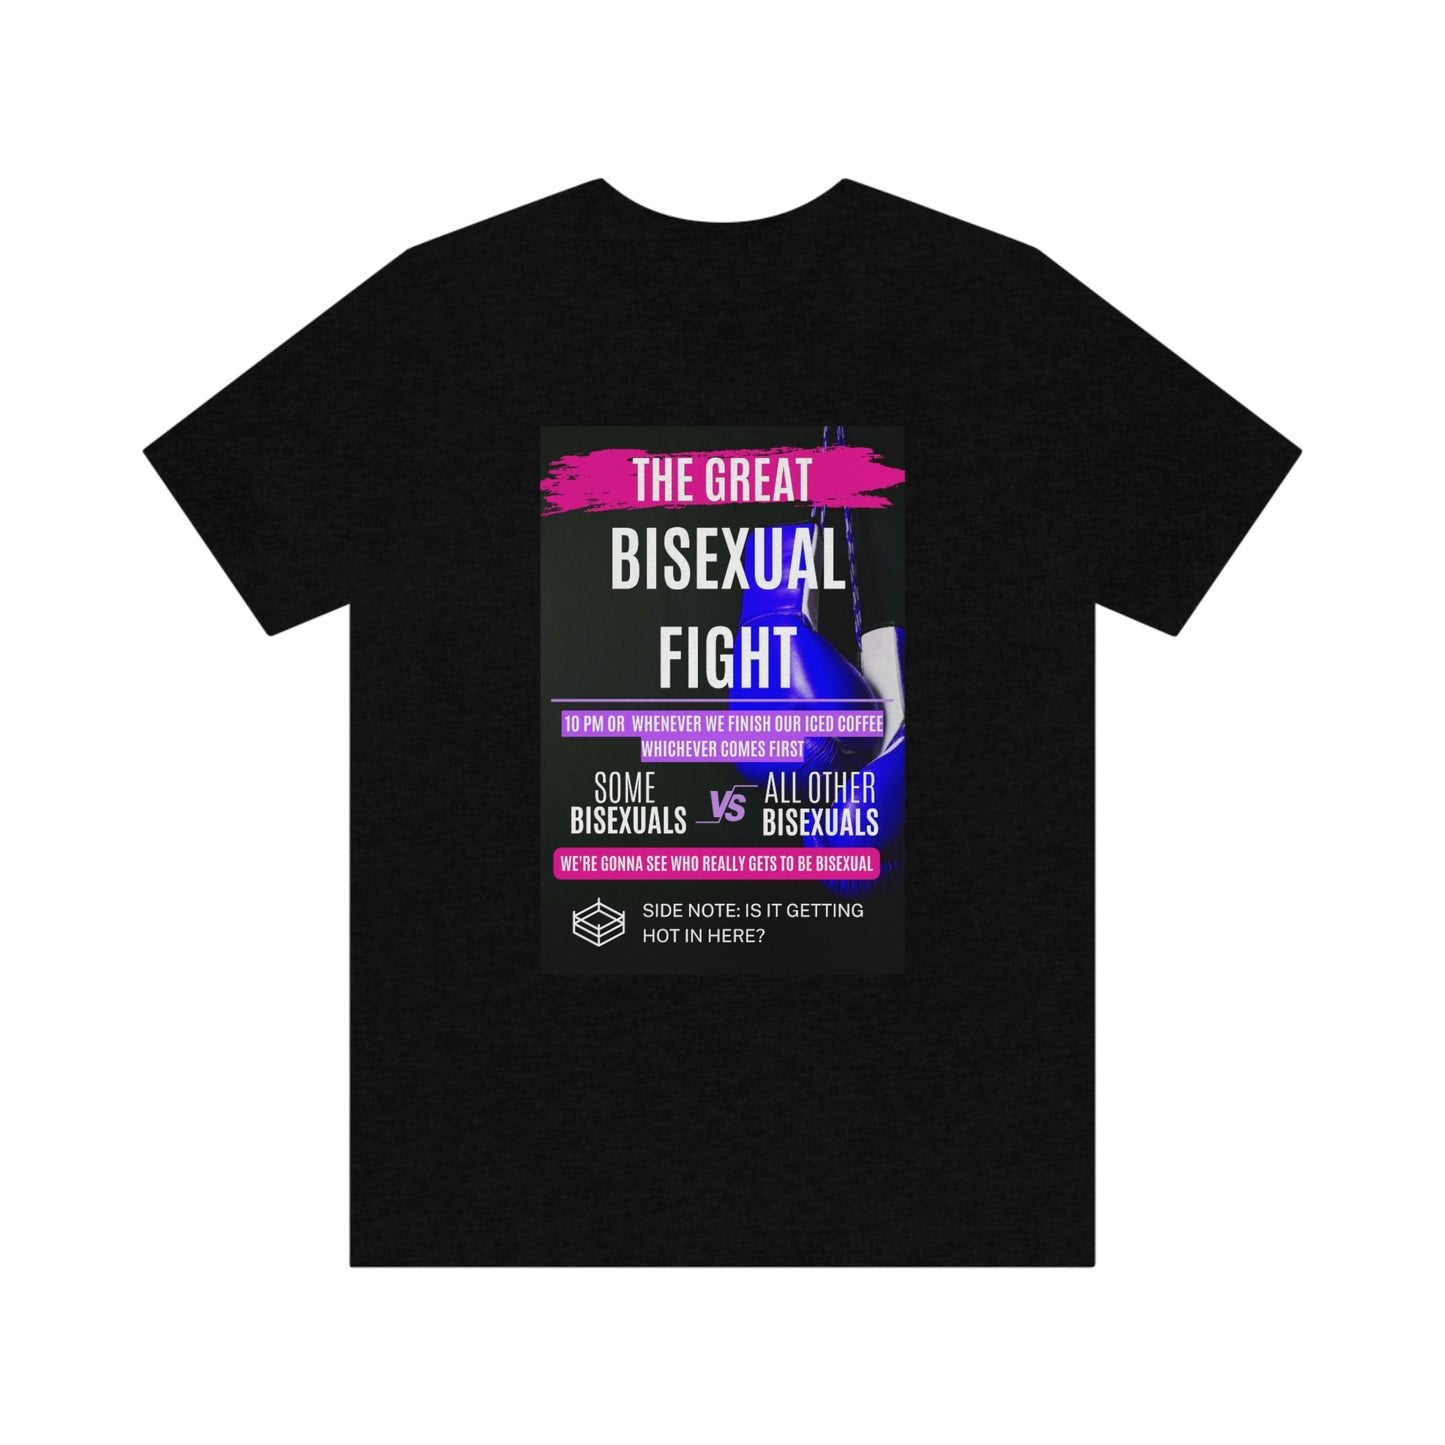 The Great Bisexual Fight Shirt